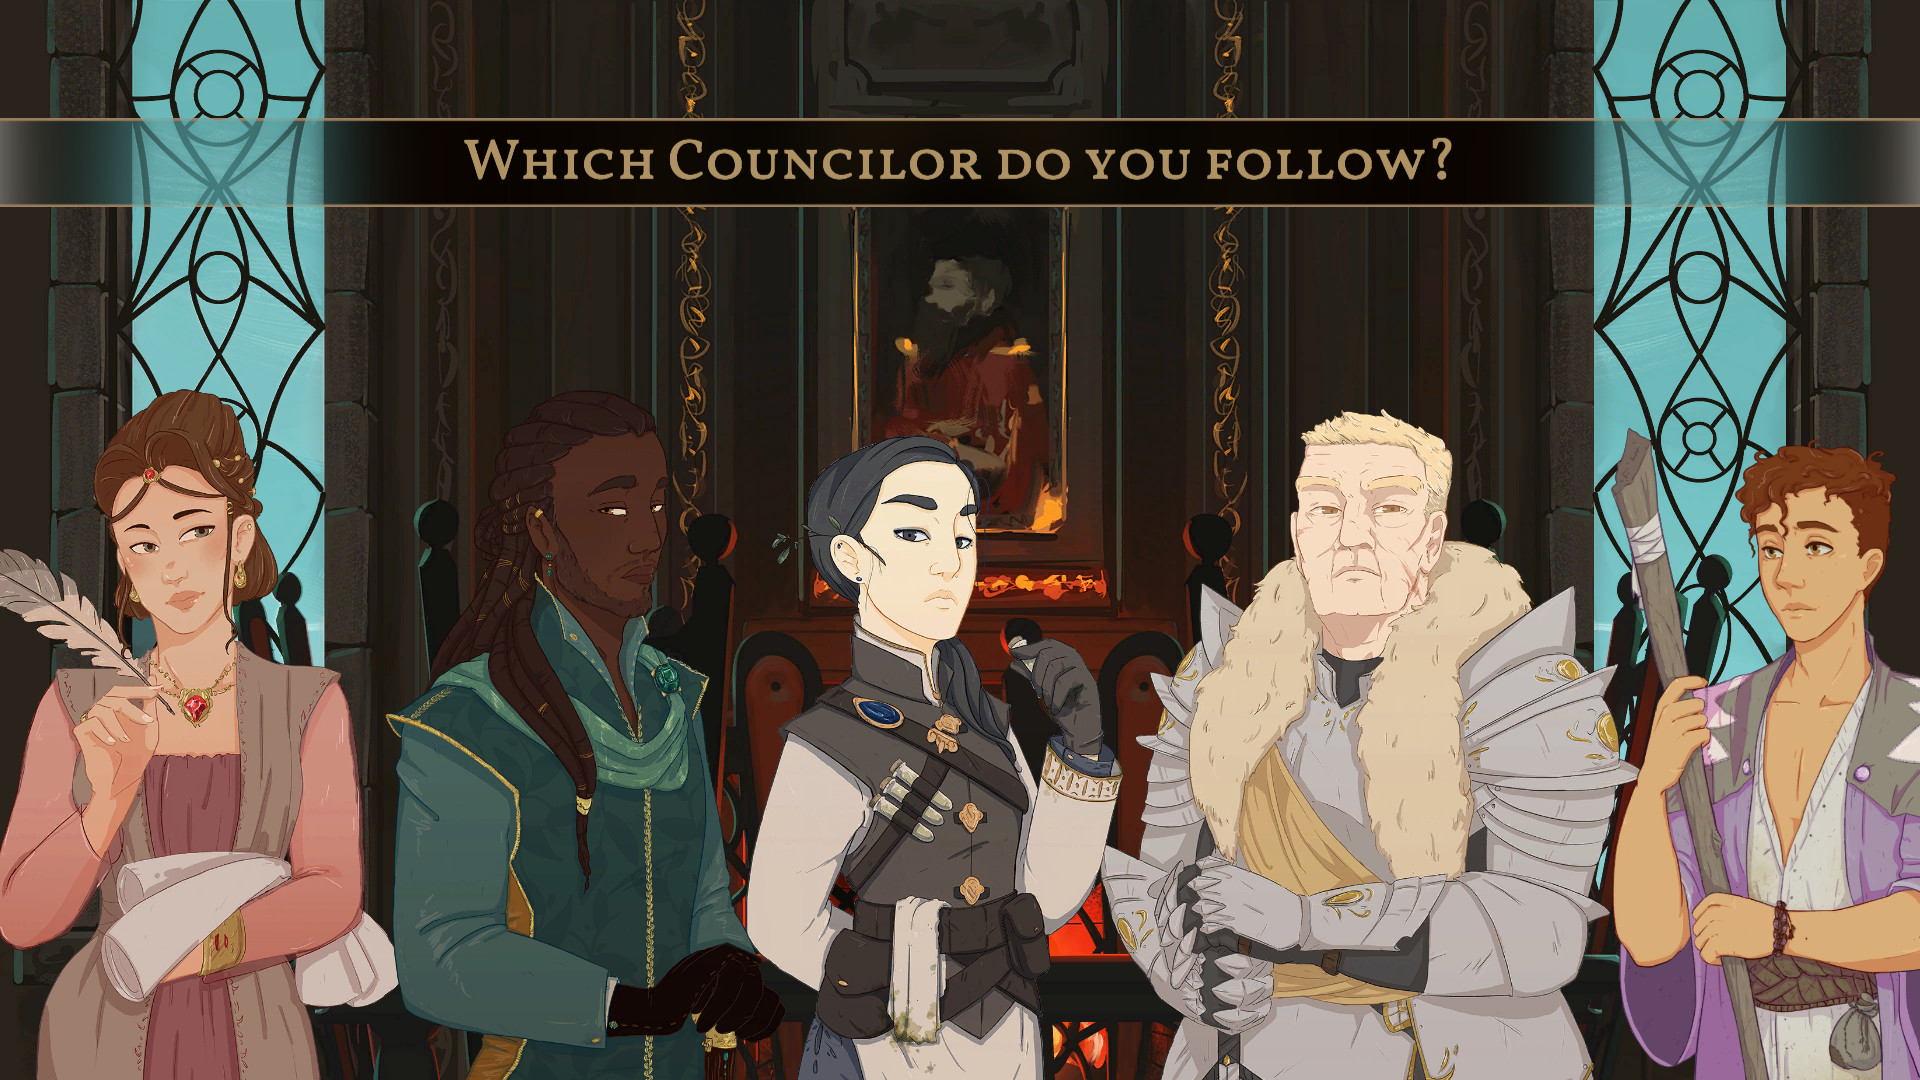 Court of Ashes Free Download